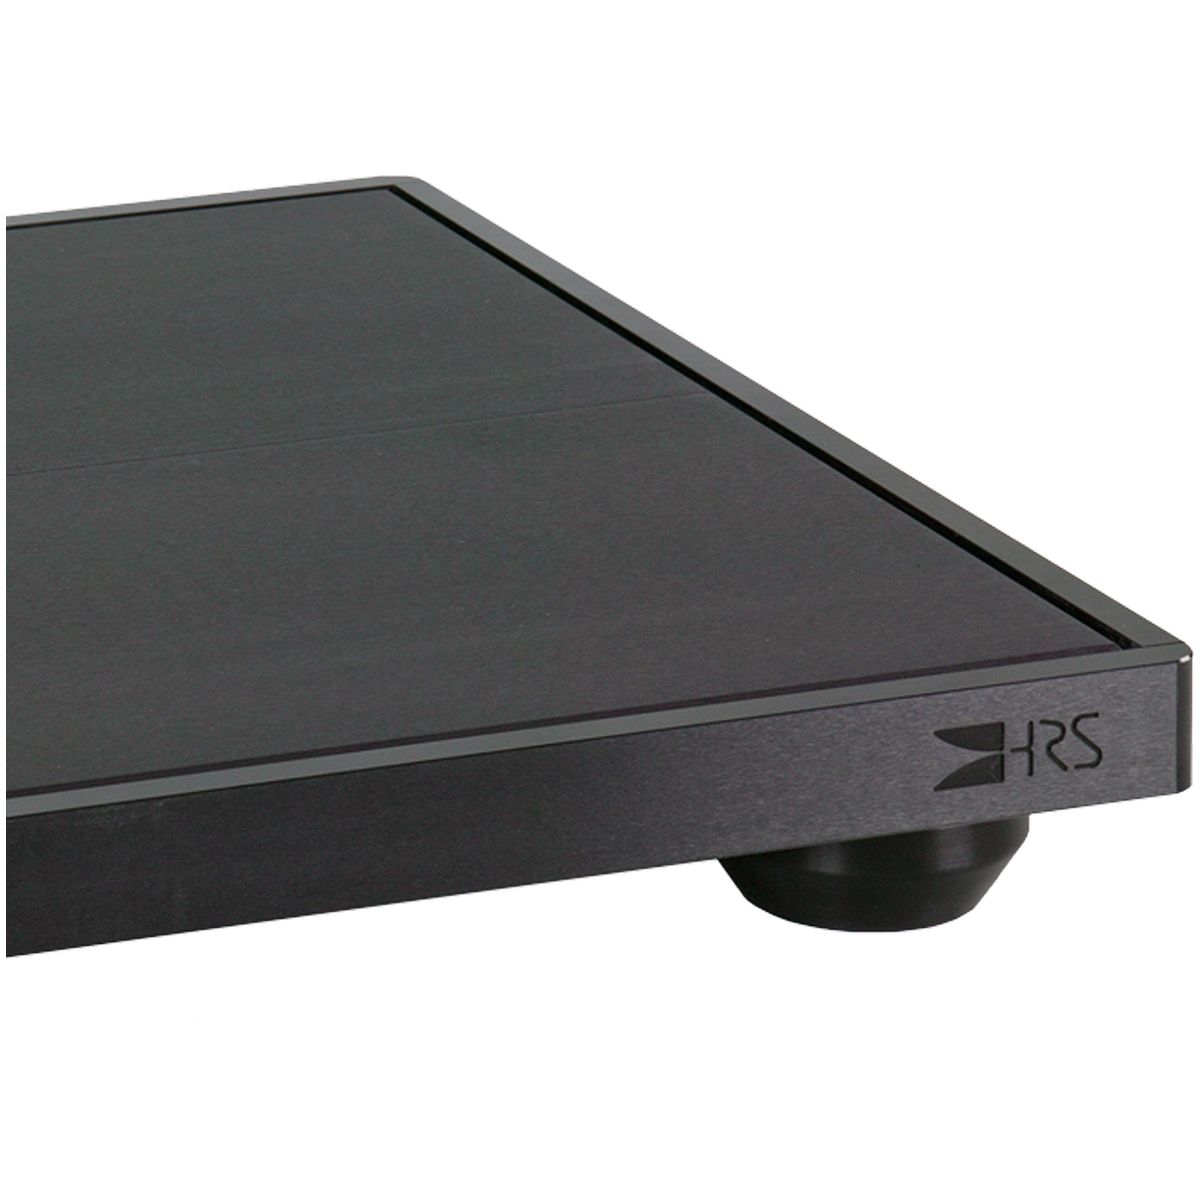 HRS S3 Series Isolation Base